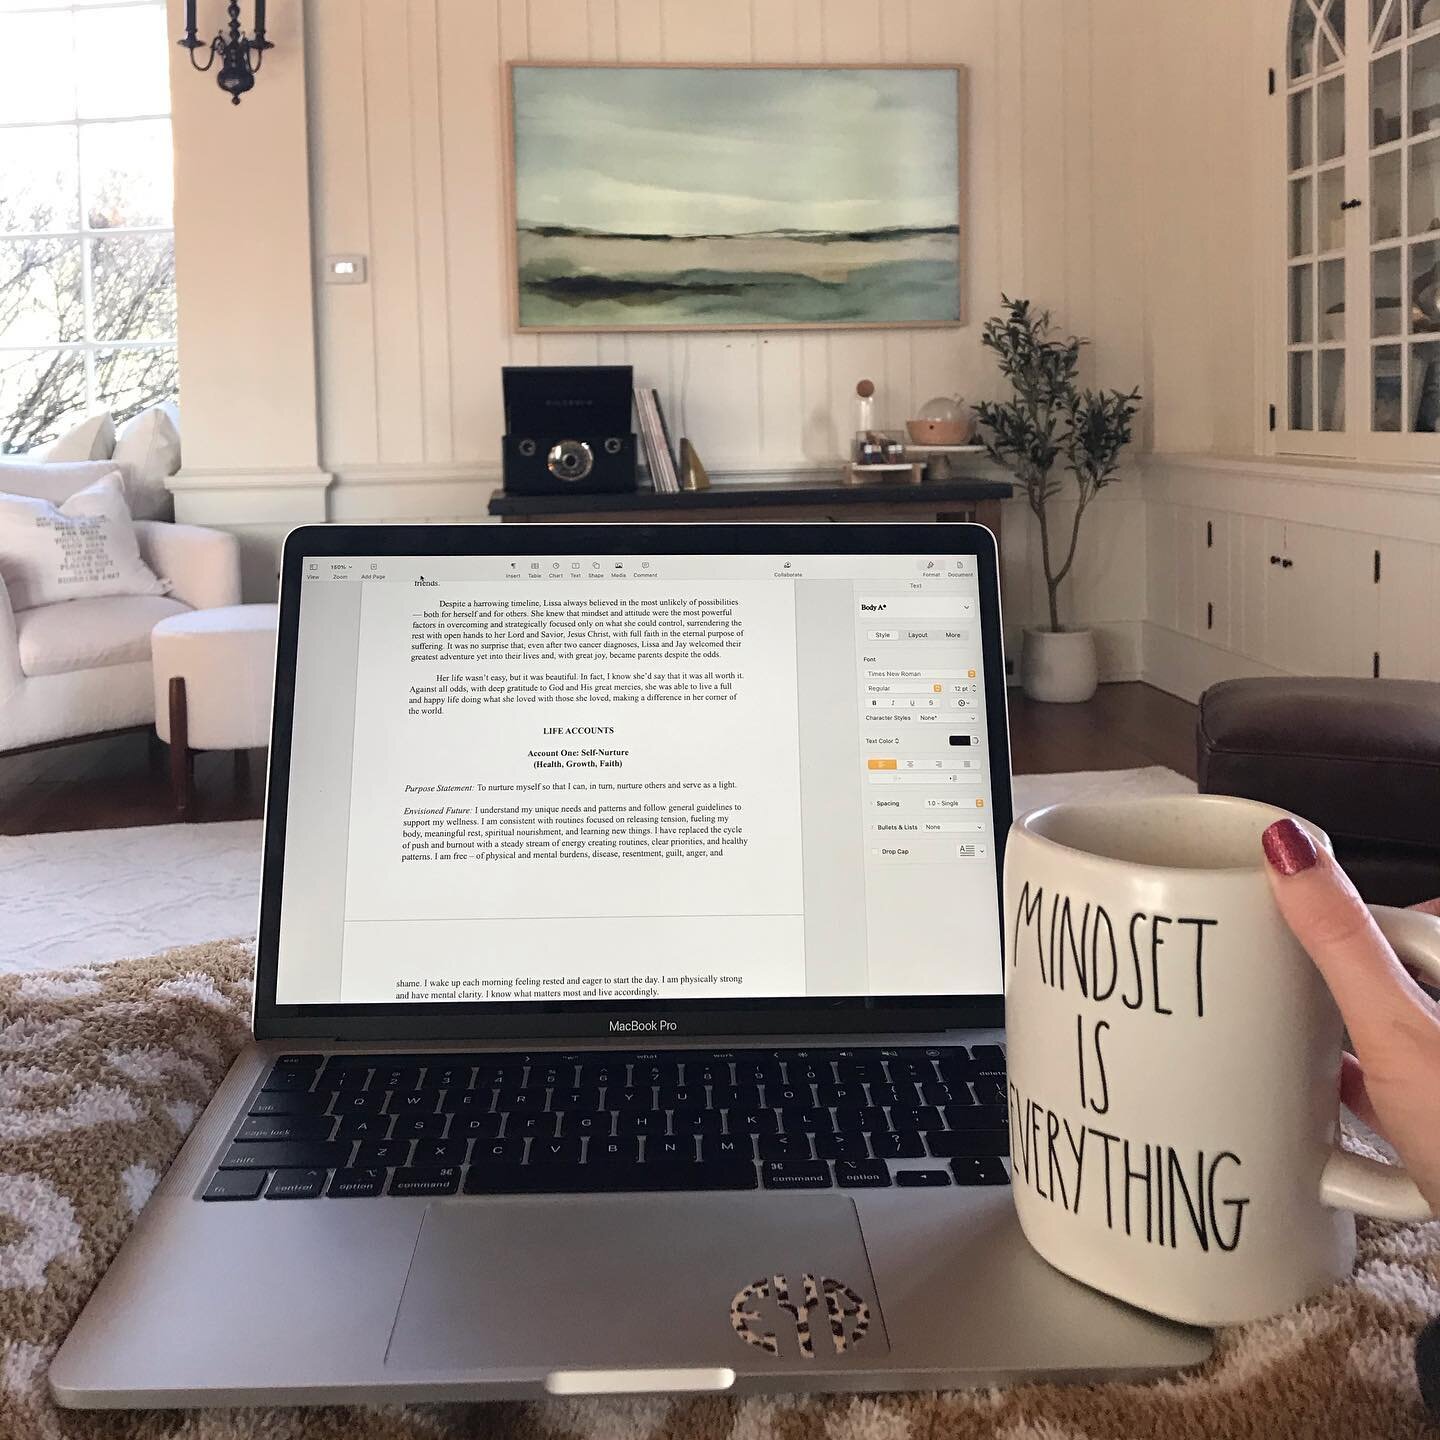 Every morning for 90 days, before the noise and chaos and pinging and updates of the day, you&rsquo;ll find me here reviewing my Life Plan.✨
 ⠀⠀⠀⠀⠀⠀⠀⠀⠀⠀⠀⠀
I&rsquo;ve felt a powerful shift and clarity since working through Living Forward and writing o